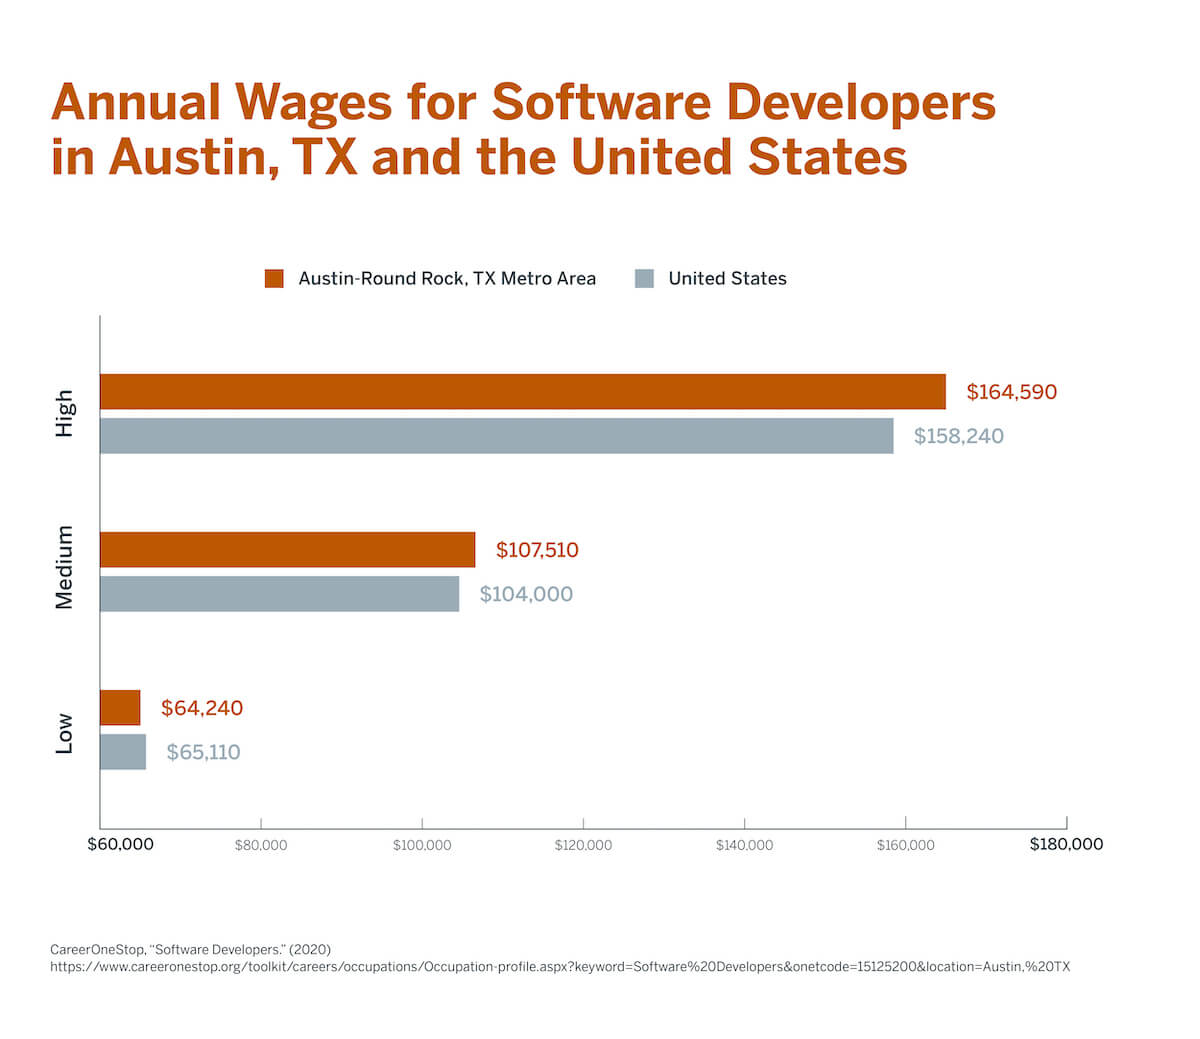 A chart that compares the annual wages of software developers in Austin, TX, and the United States.